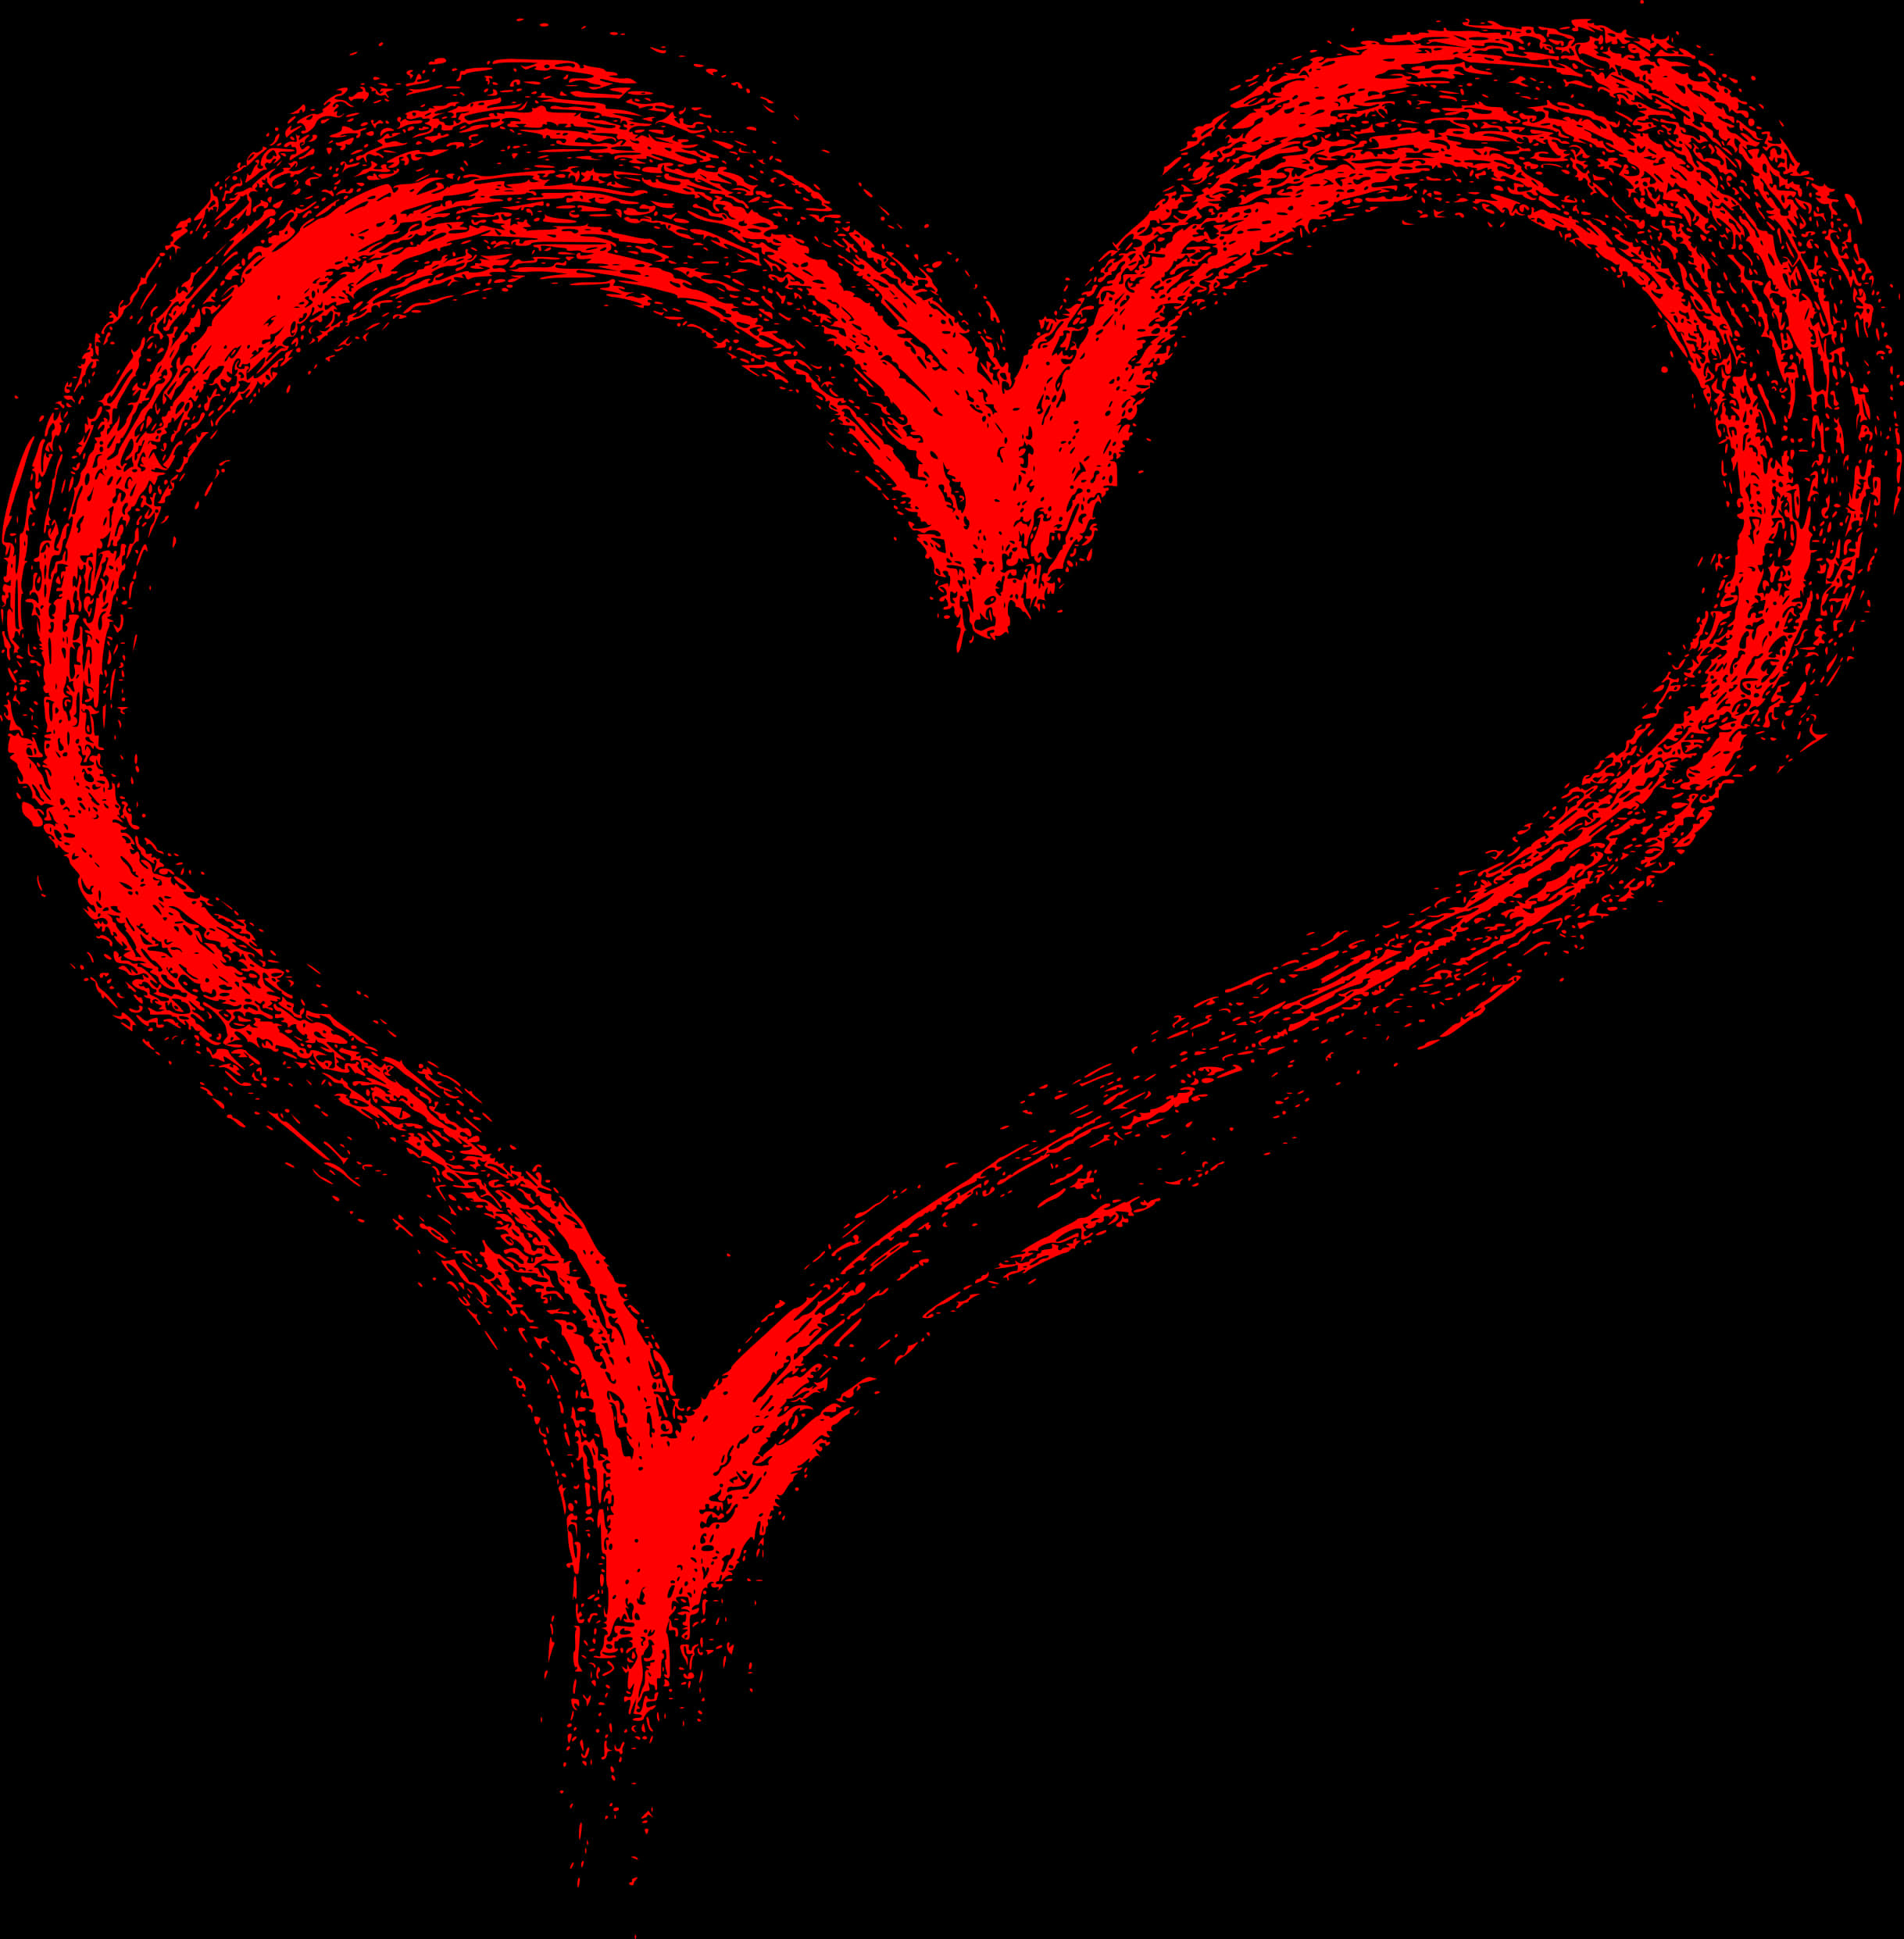 A Red Heart Drawn On A Black Background